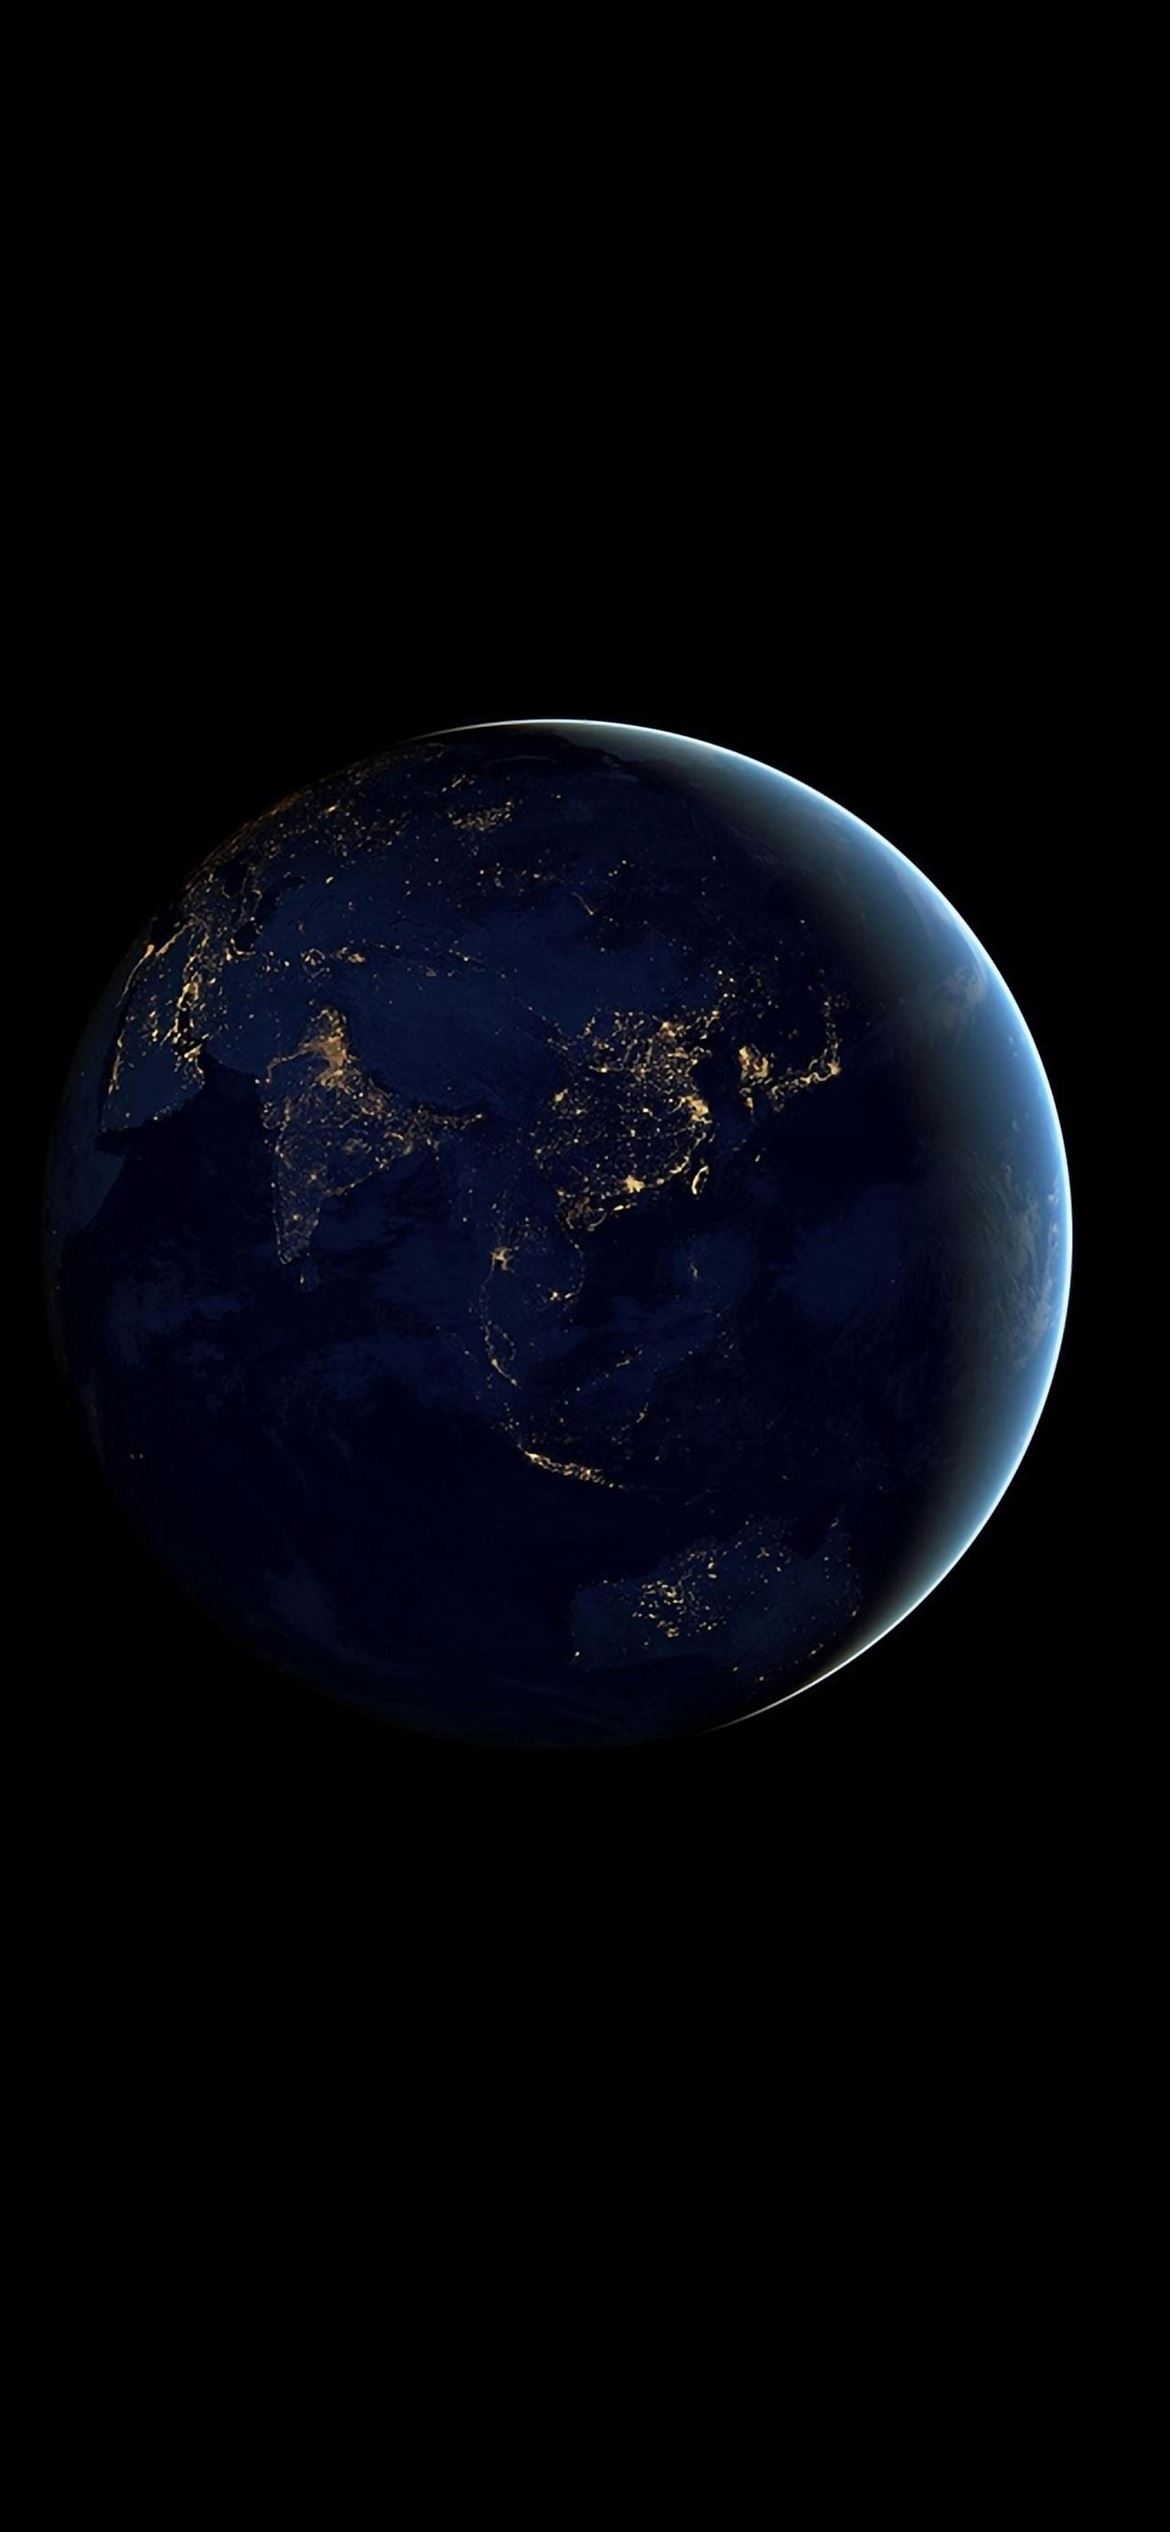 Asia At Night Earth Space Dark iPhone Wallpapers Free Download